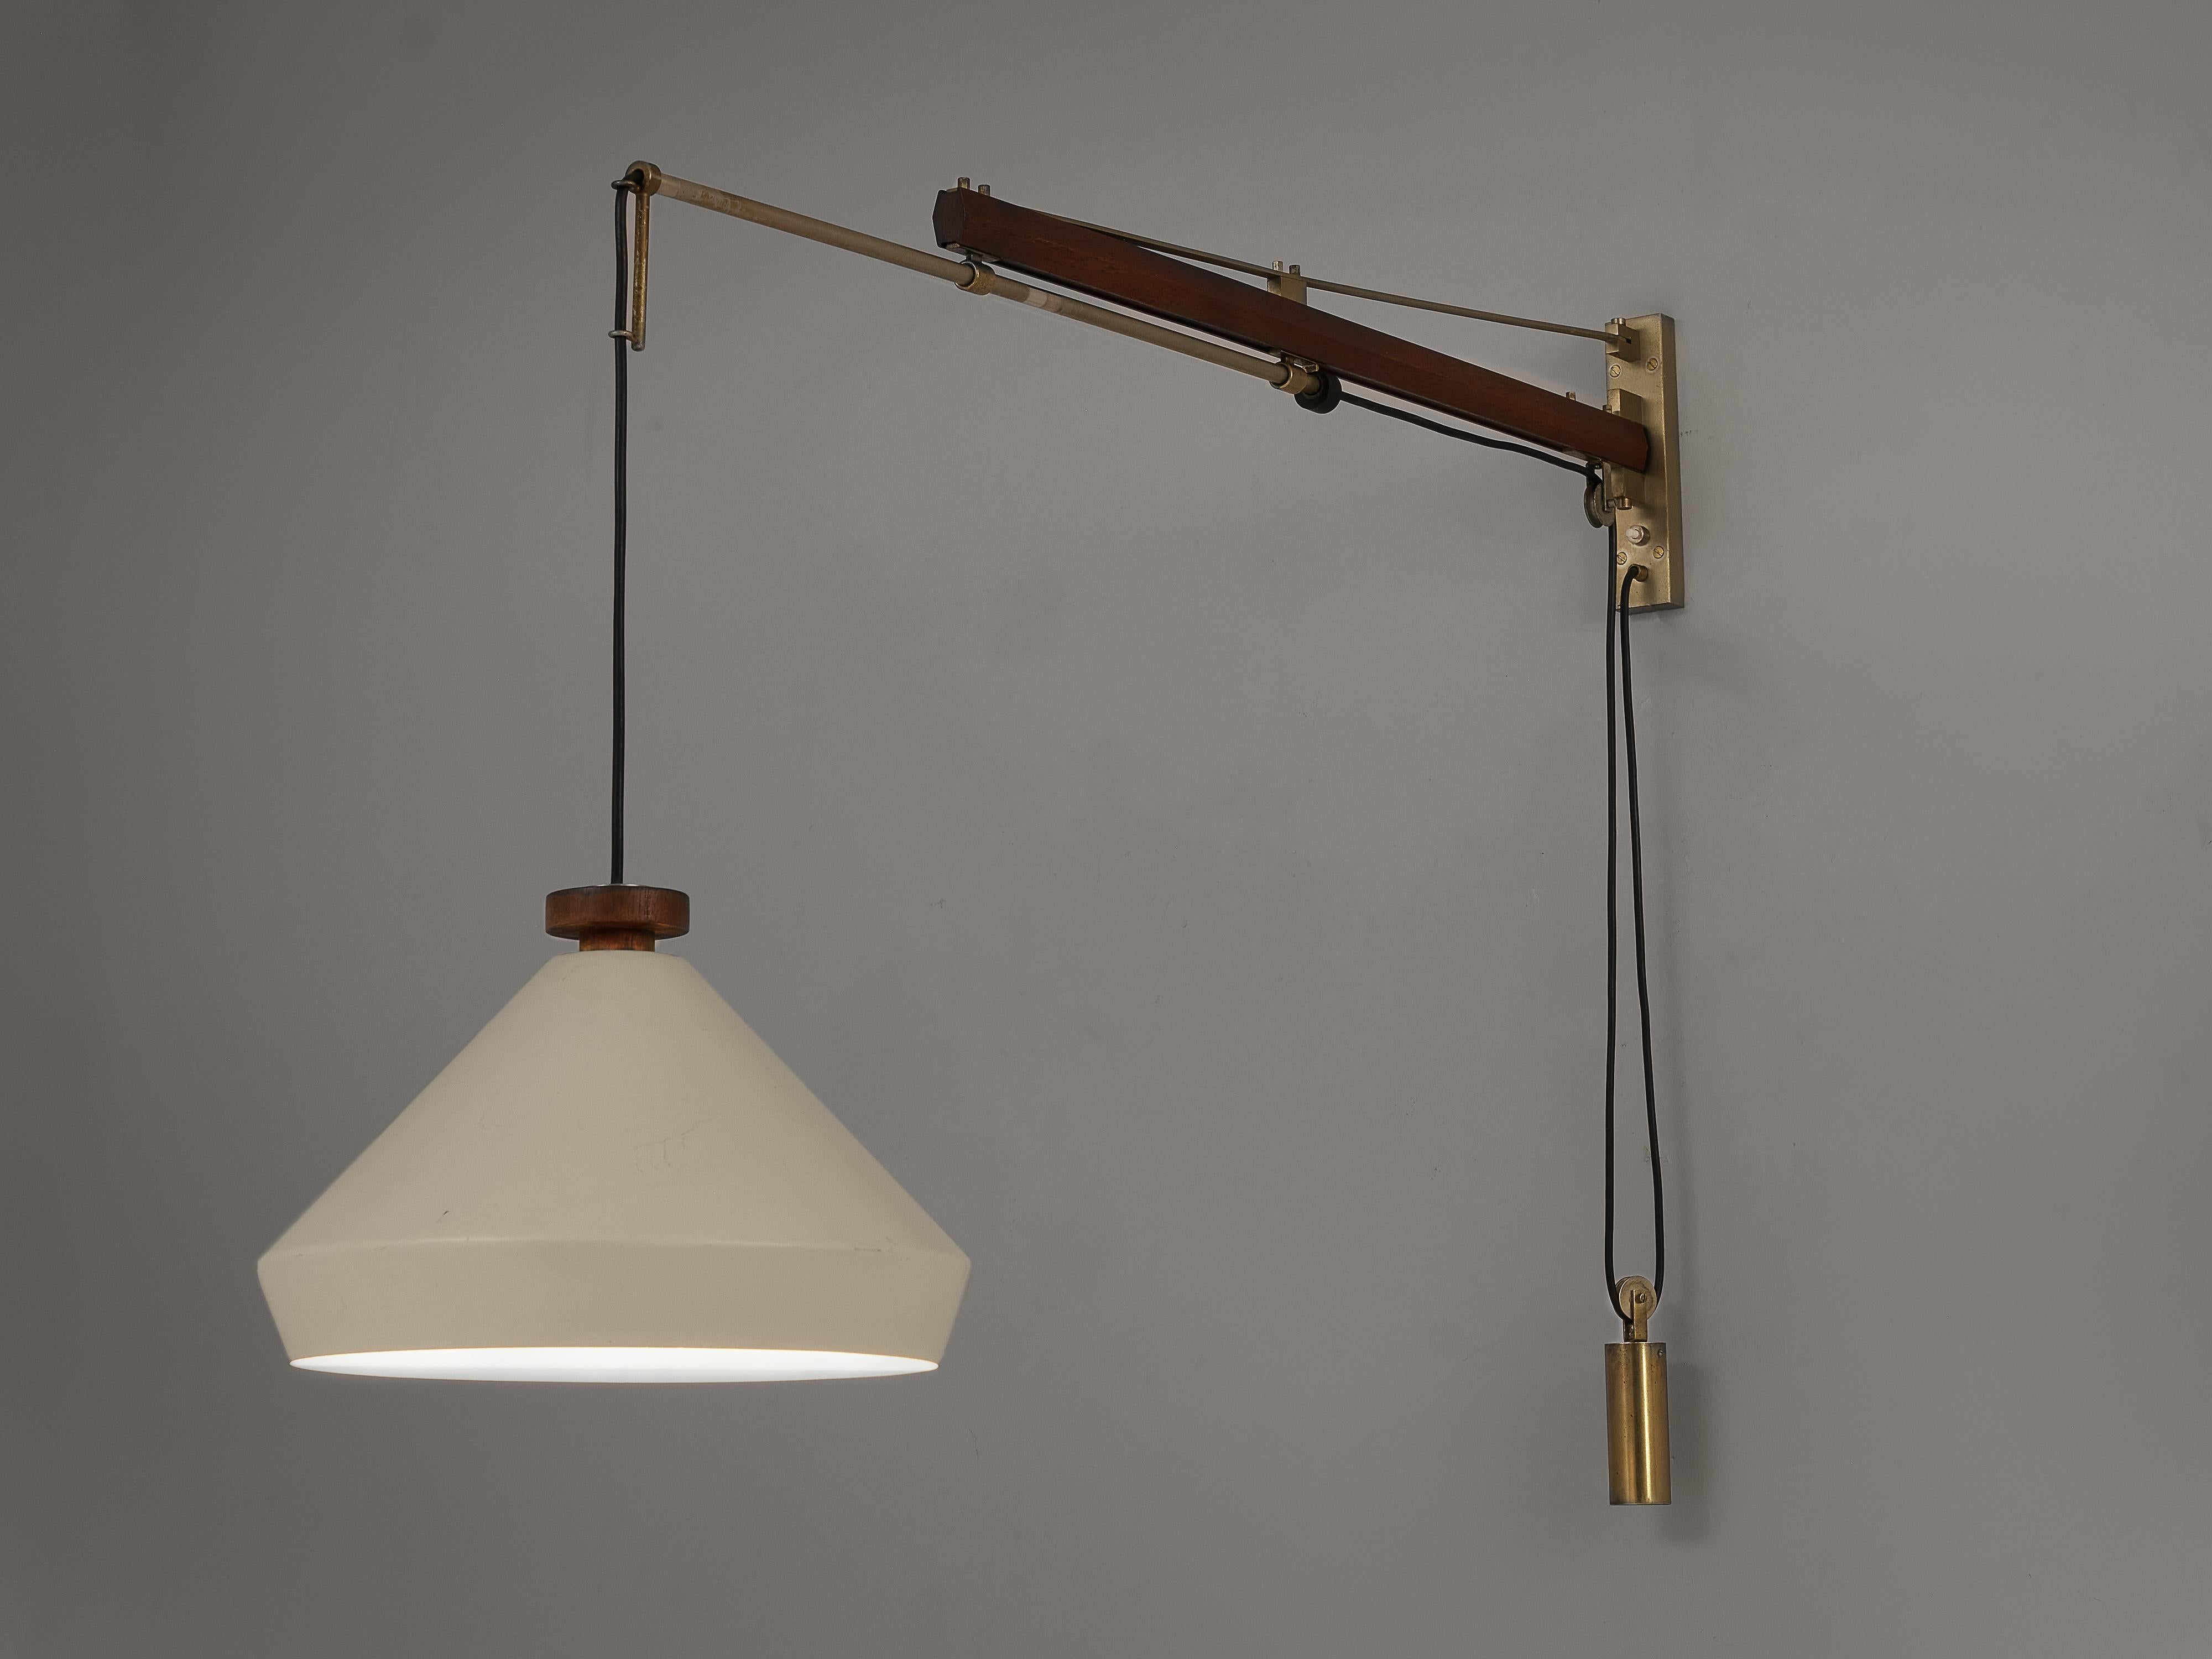 Tito Agnoli for O-Luce, wall light, white lacquered metal, teak, cord and brass, Italy, circa 1950. 

Impressive wall mounted light designed by Tito Agnoli, and manufactured by O-Luce in circa 1950. This lamp is made of teak, lacquered metal and